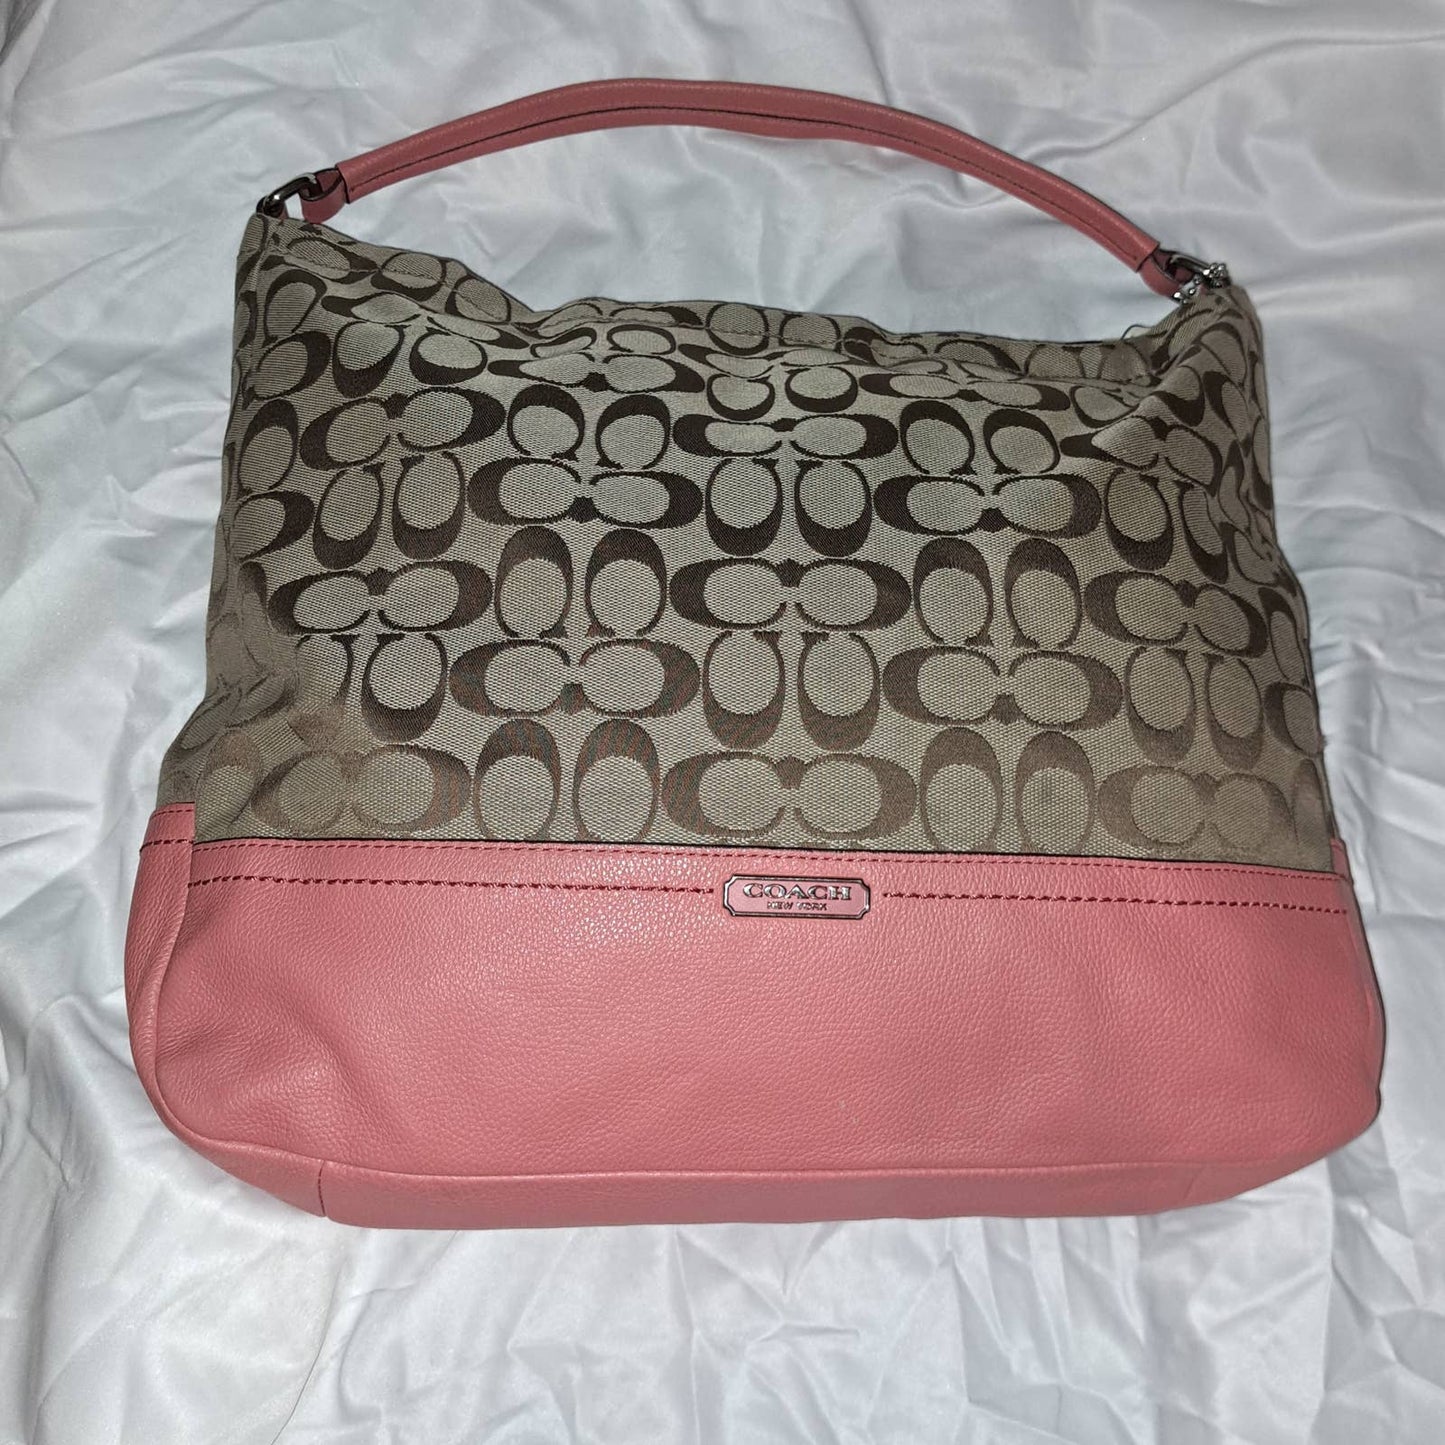 FABULOUS RARE Large Top Handle COACH in Peach and Brown